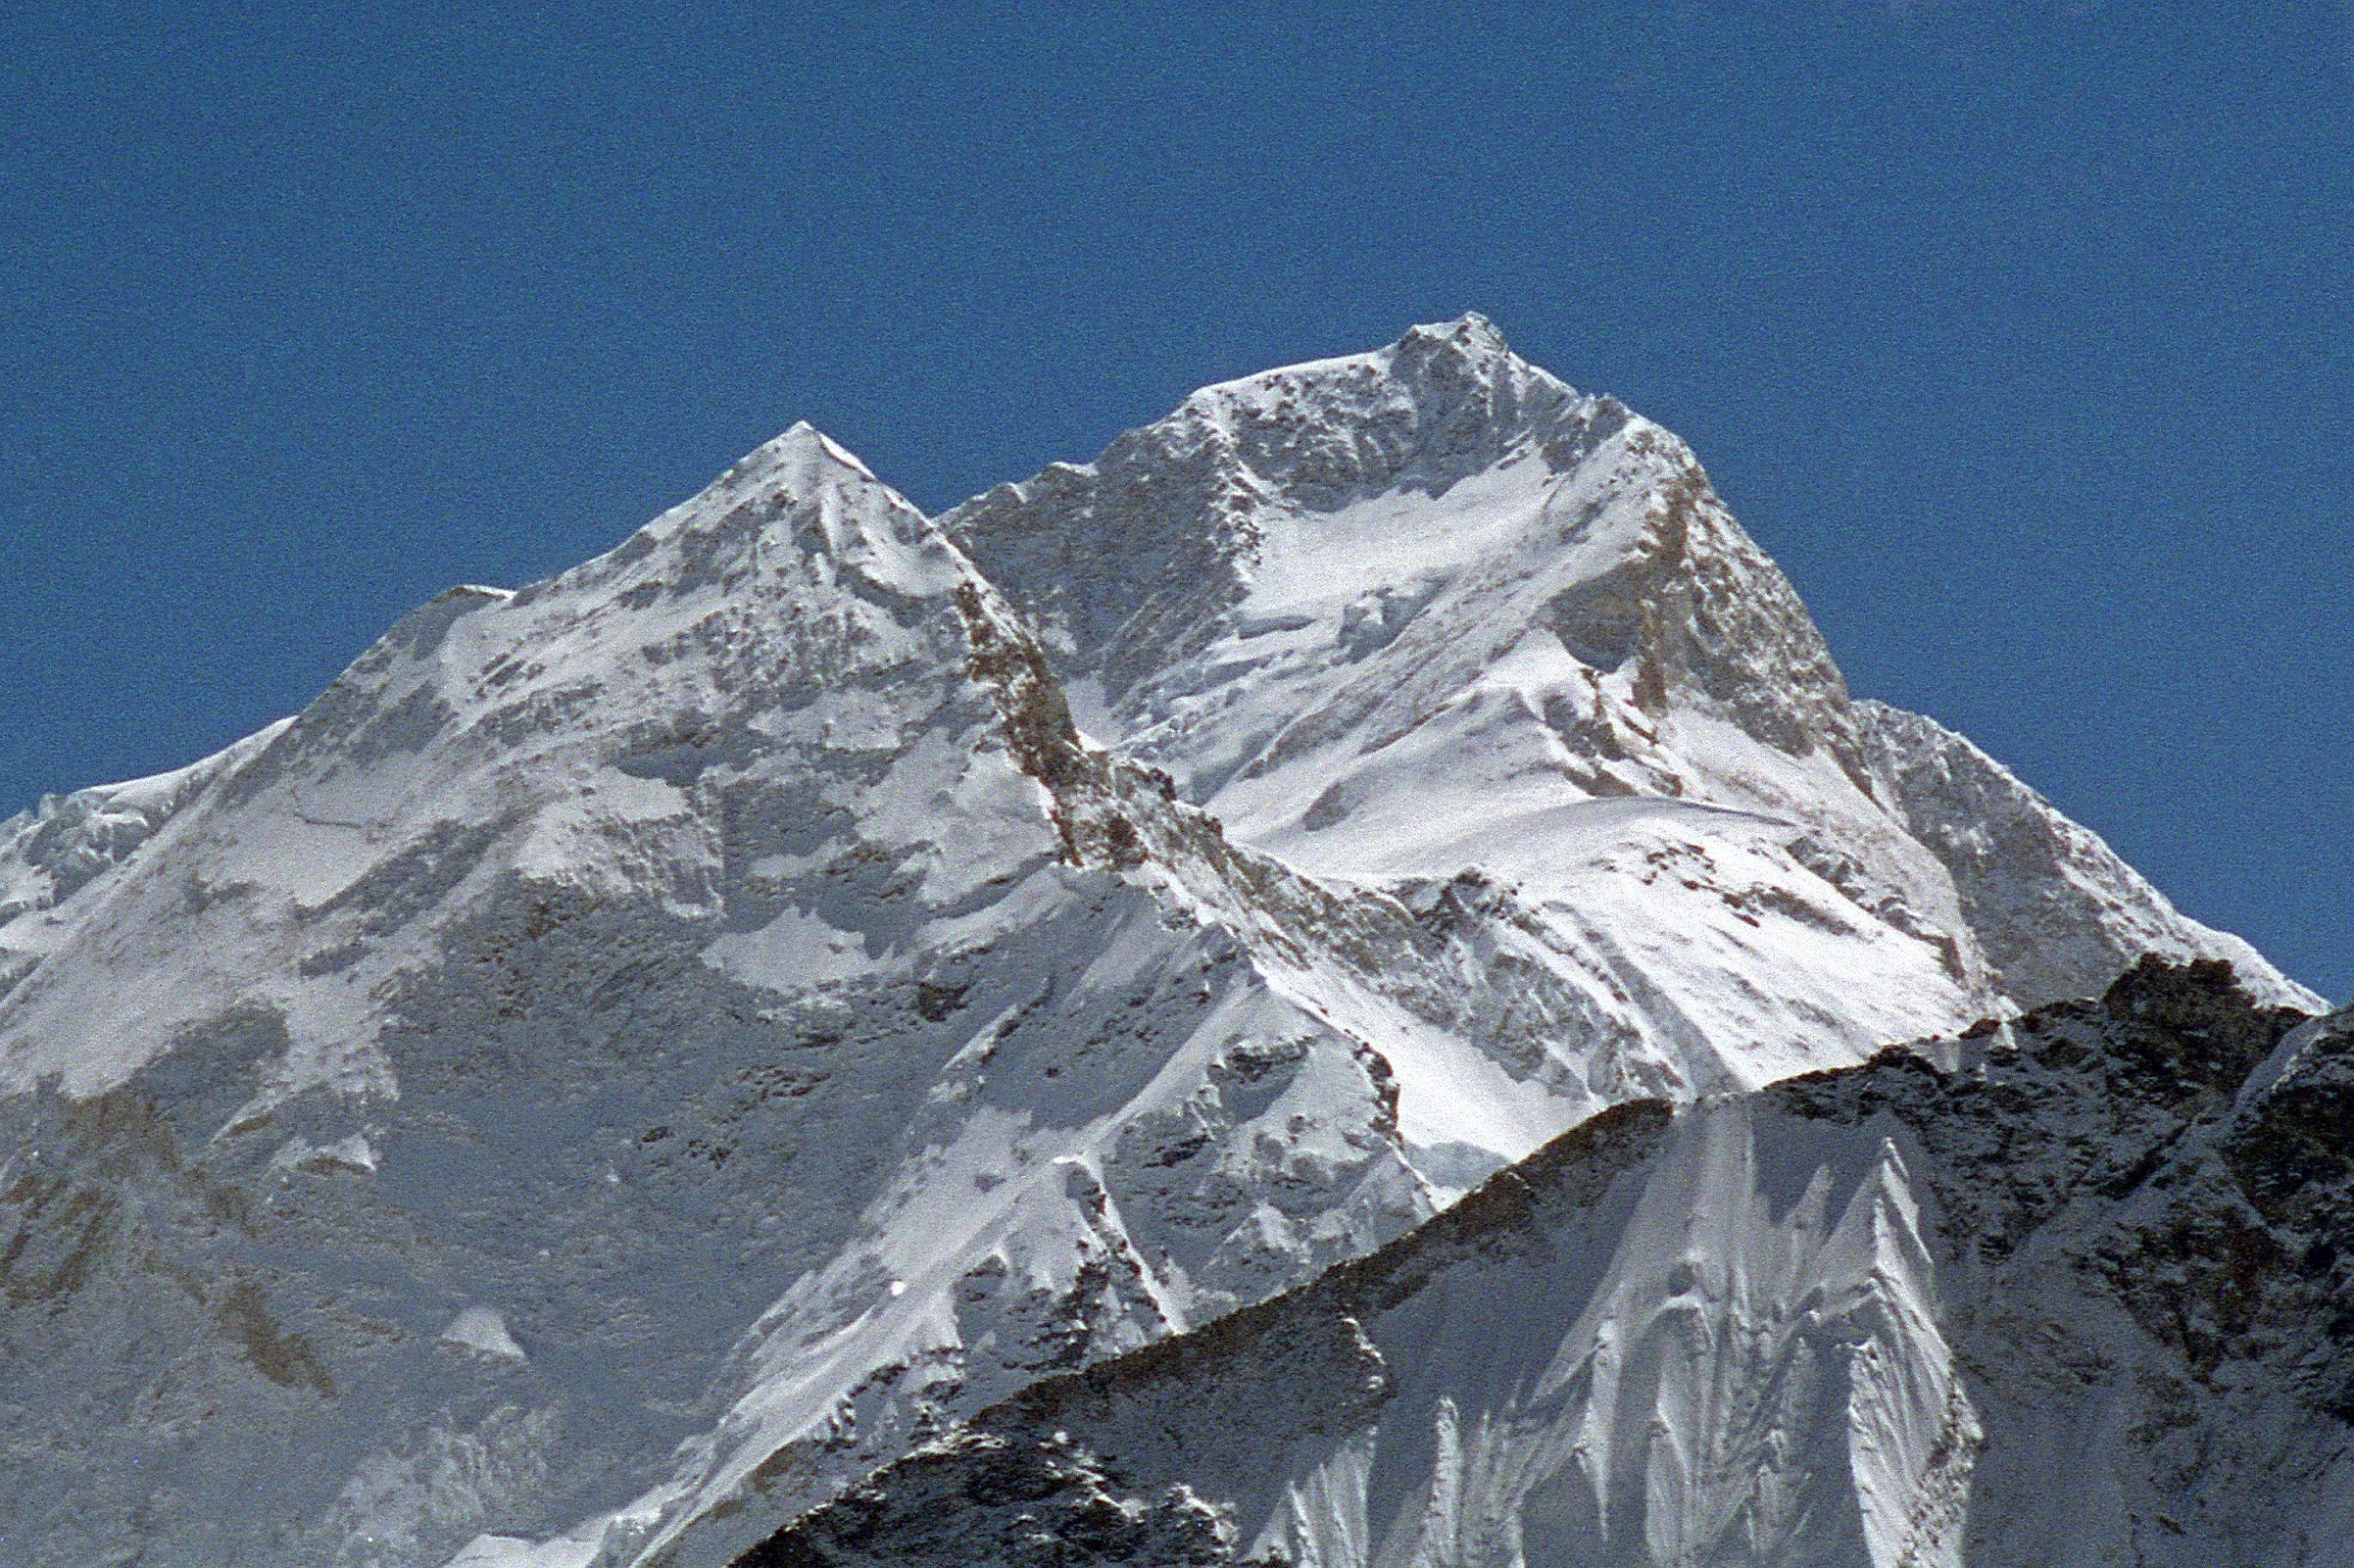 12 13 Kanchungtse and Makalu North Face Close Up From Everest East Base Camp In Tibet